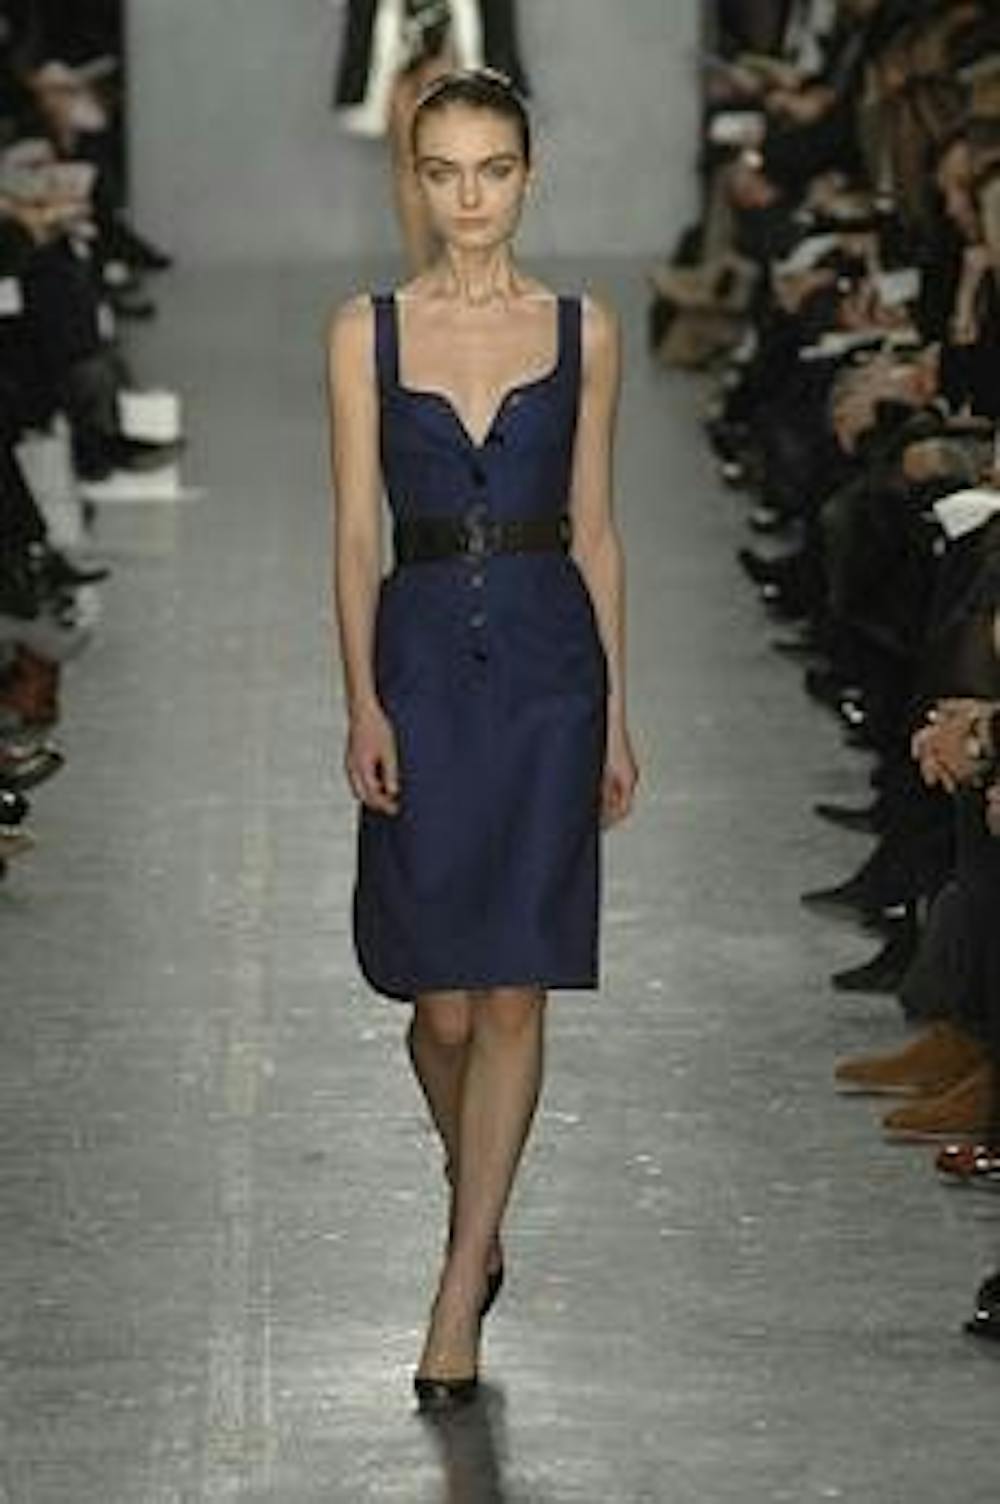 FALL LOOKS - Mismatching and preppy styles are two of the top looks for fall. Here, designers Derek Lam and Ralph Lauren showcase these looks in their fall 2007 shows. These looks have moved from the runway to more mainstream labels that are readily avail